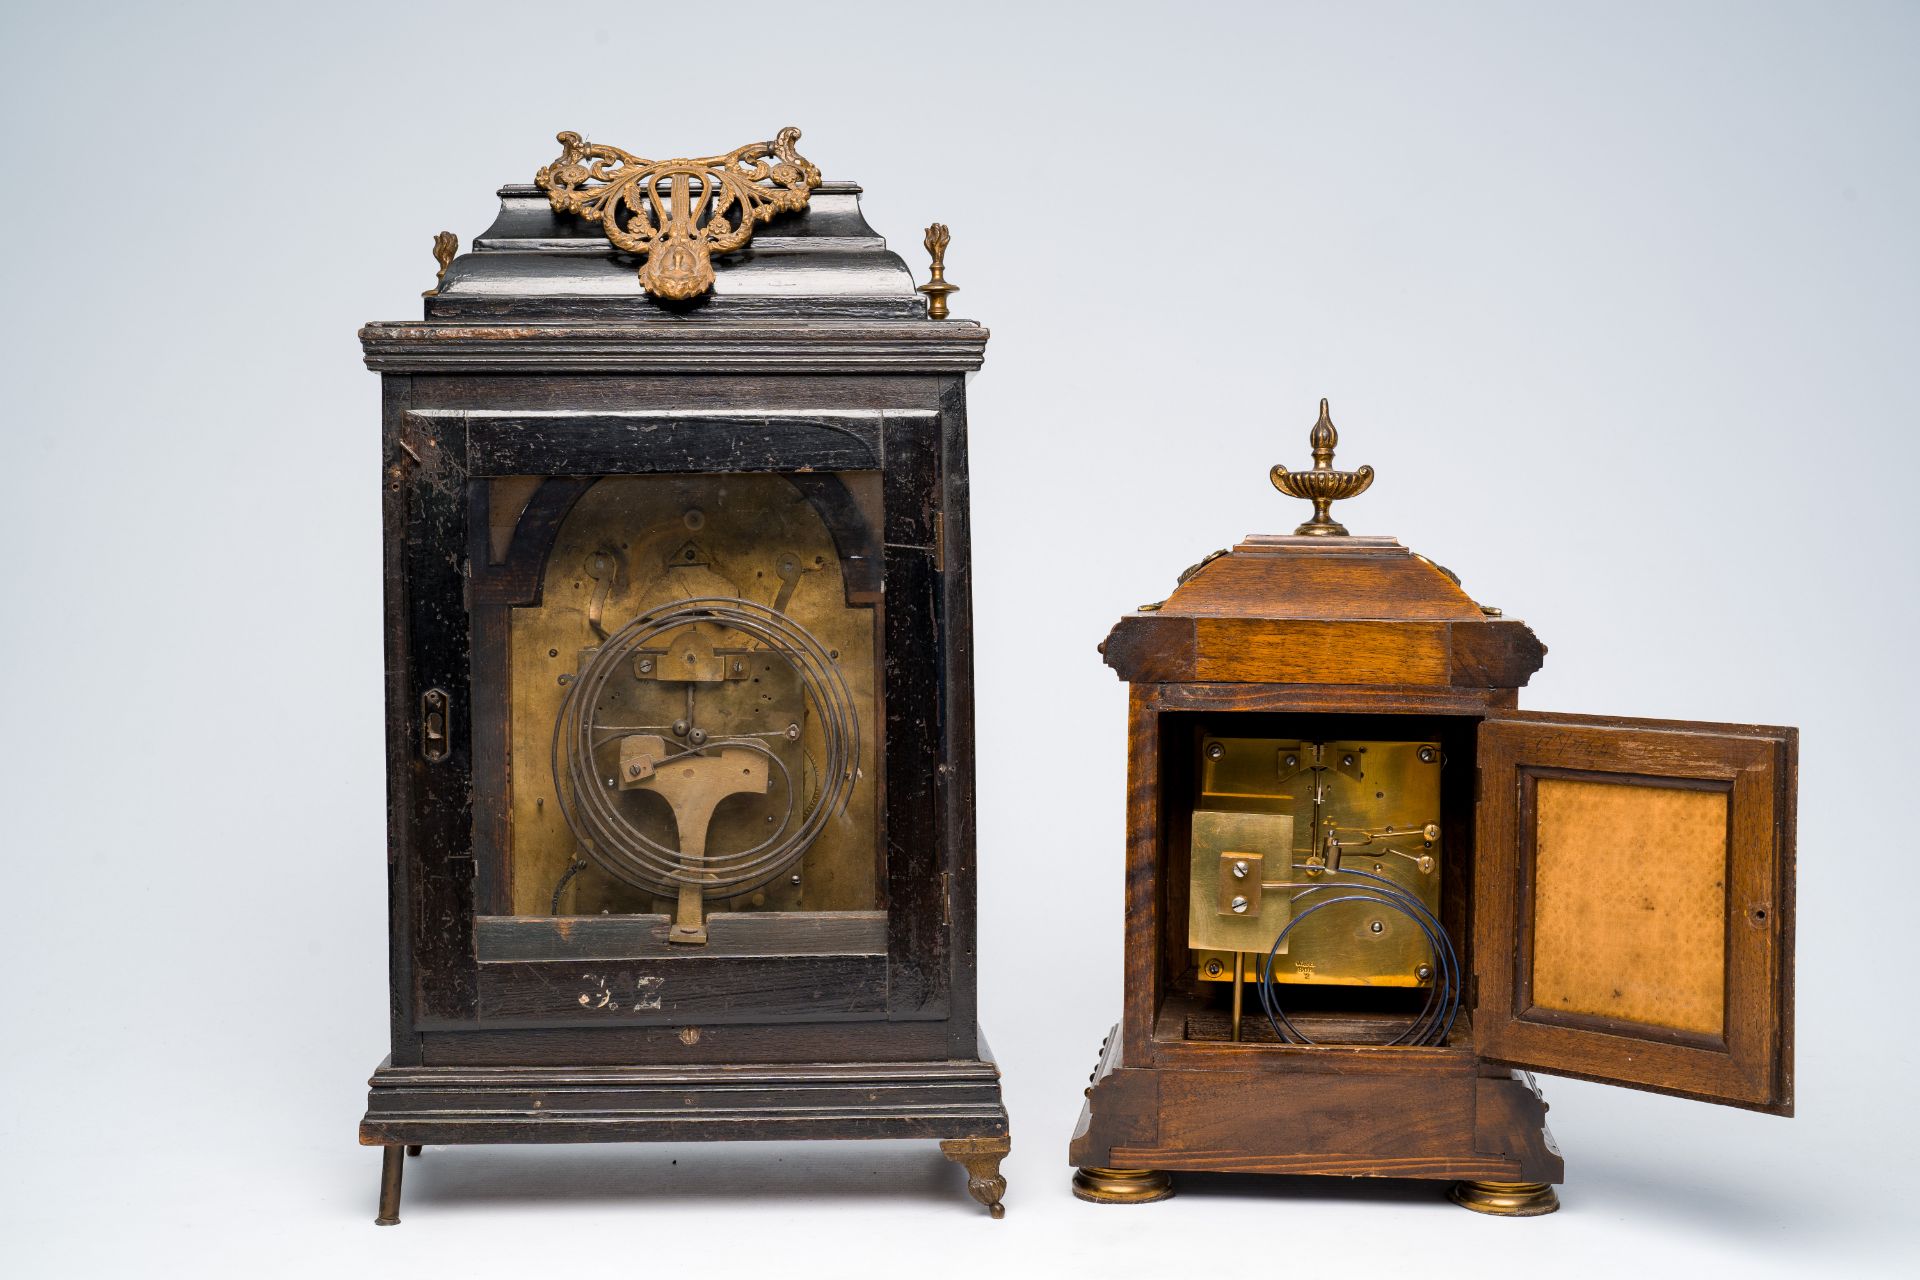 Two German bronze mounted table clocks in (ebonized) wood, 19th/20th C. - Image 4 of 7